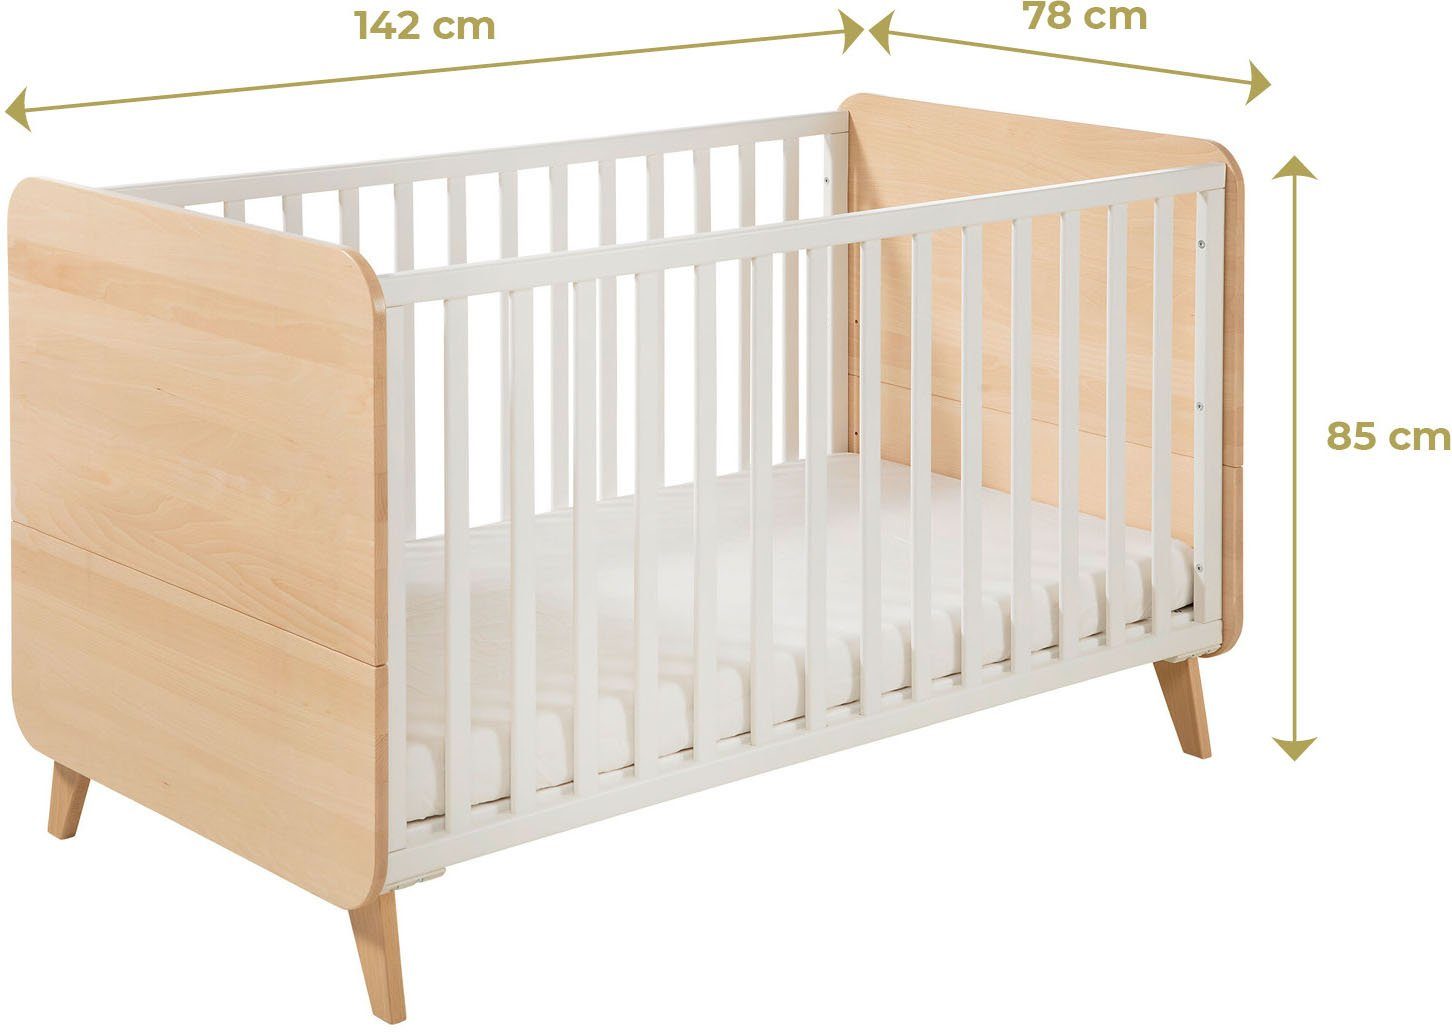 Geuther Babybett »Traumwald«, Made in Germany-HomeTrends